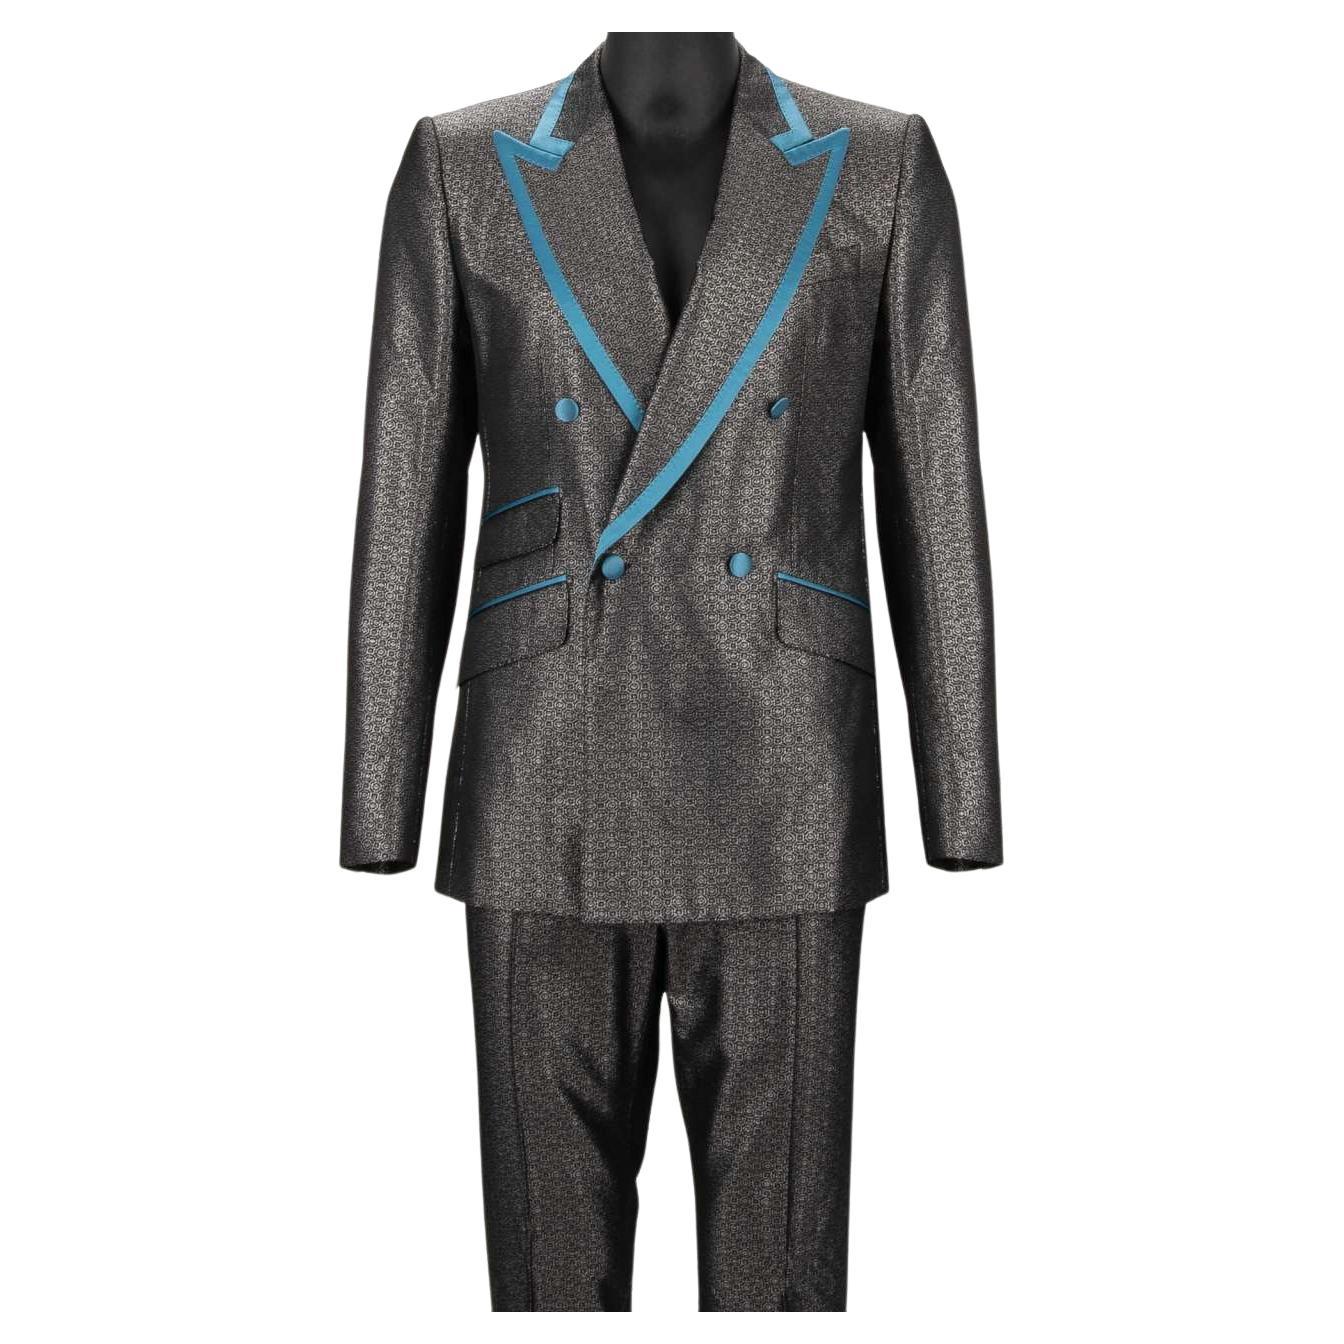 Dolce & Gabbana Glitter Jacquard Double breasted Suit Silver Blue 48 US 38 M For Sale